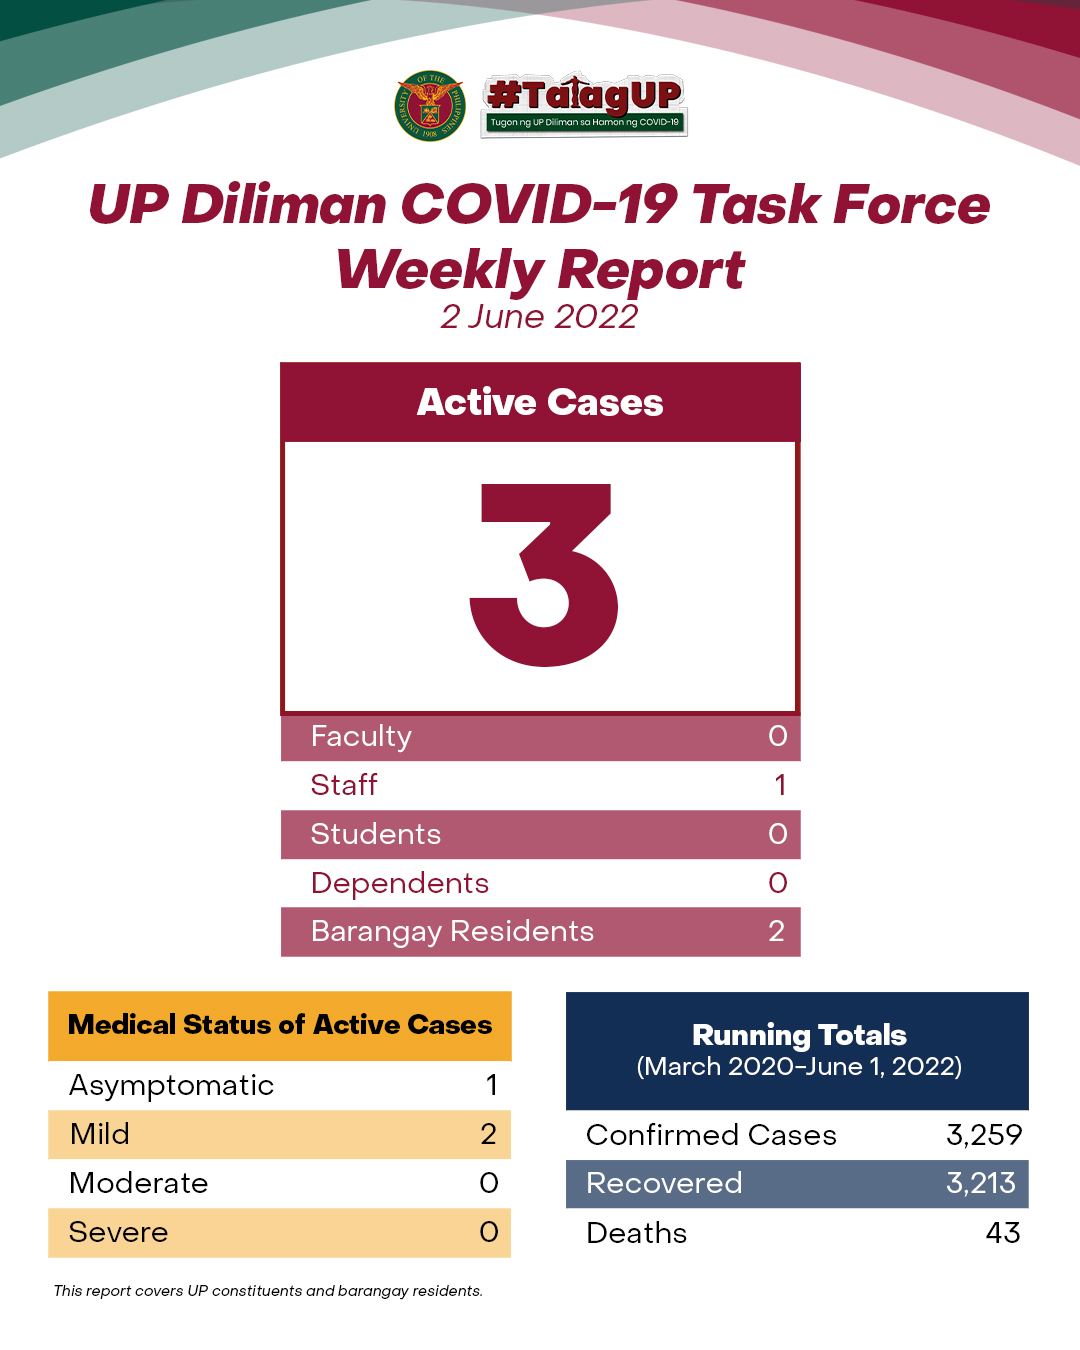 UP Diliman COVID-19 Task Force Weekly Report (2 June 2022)